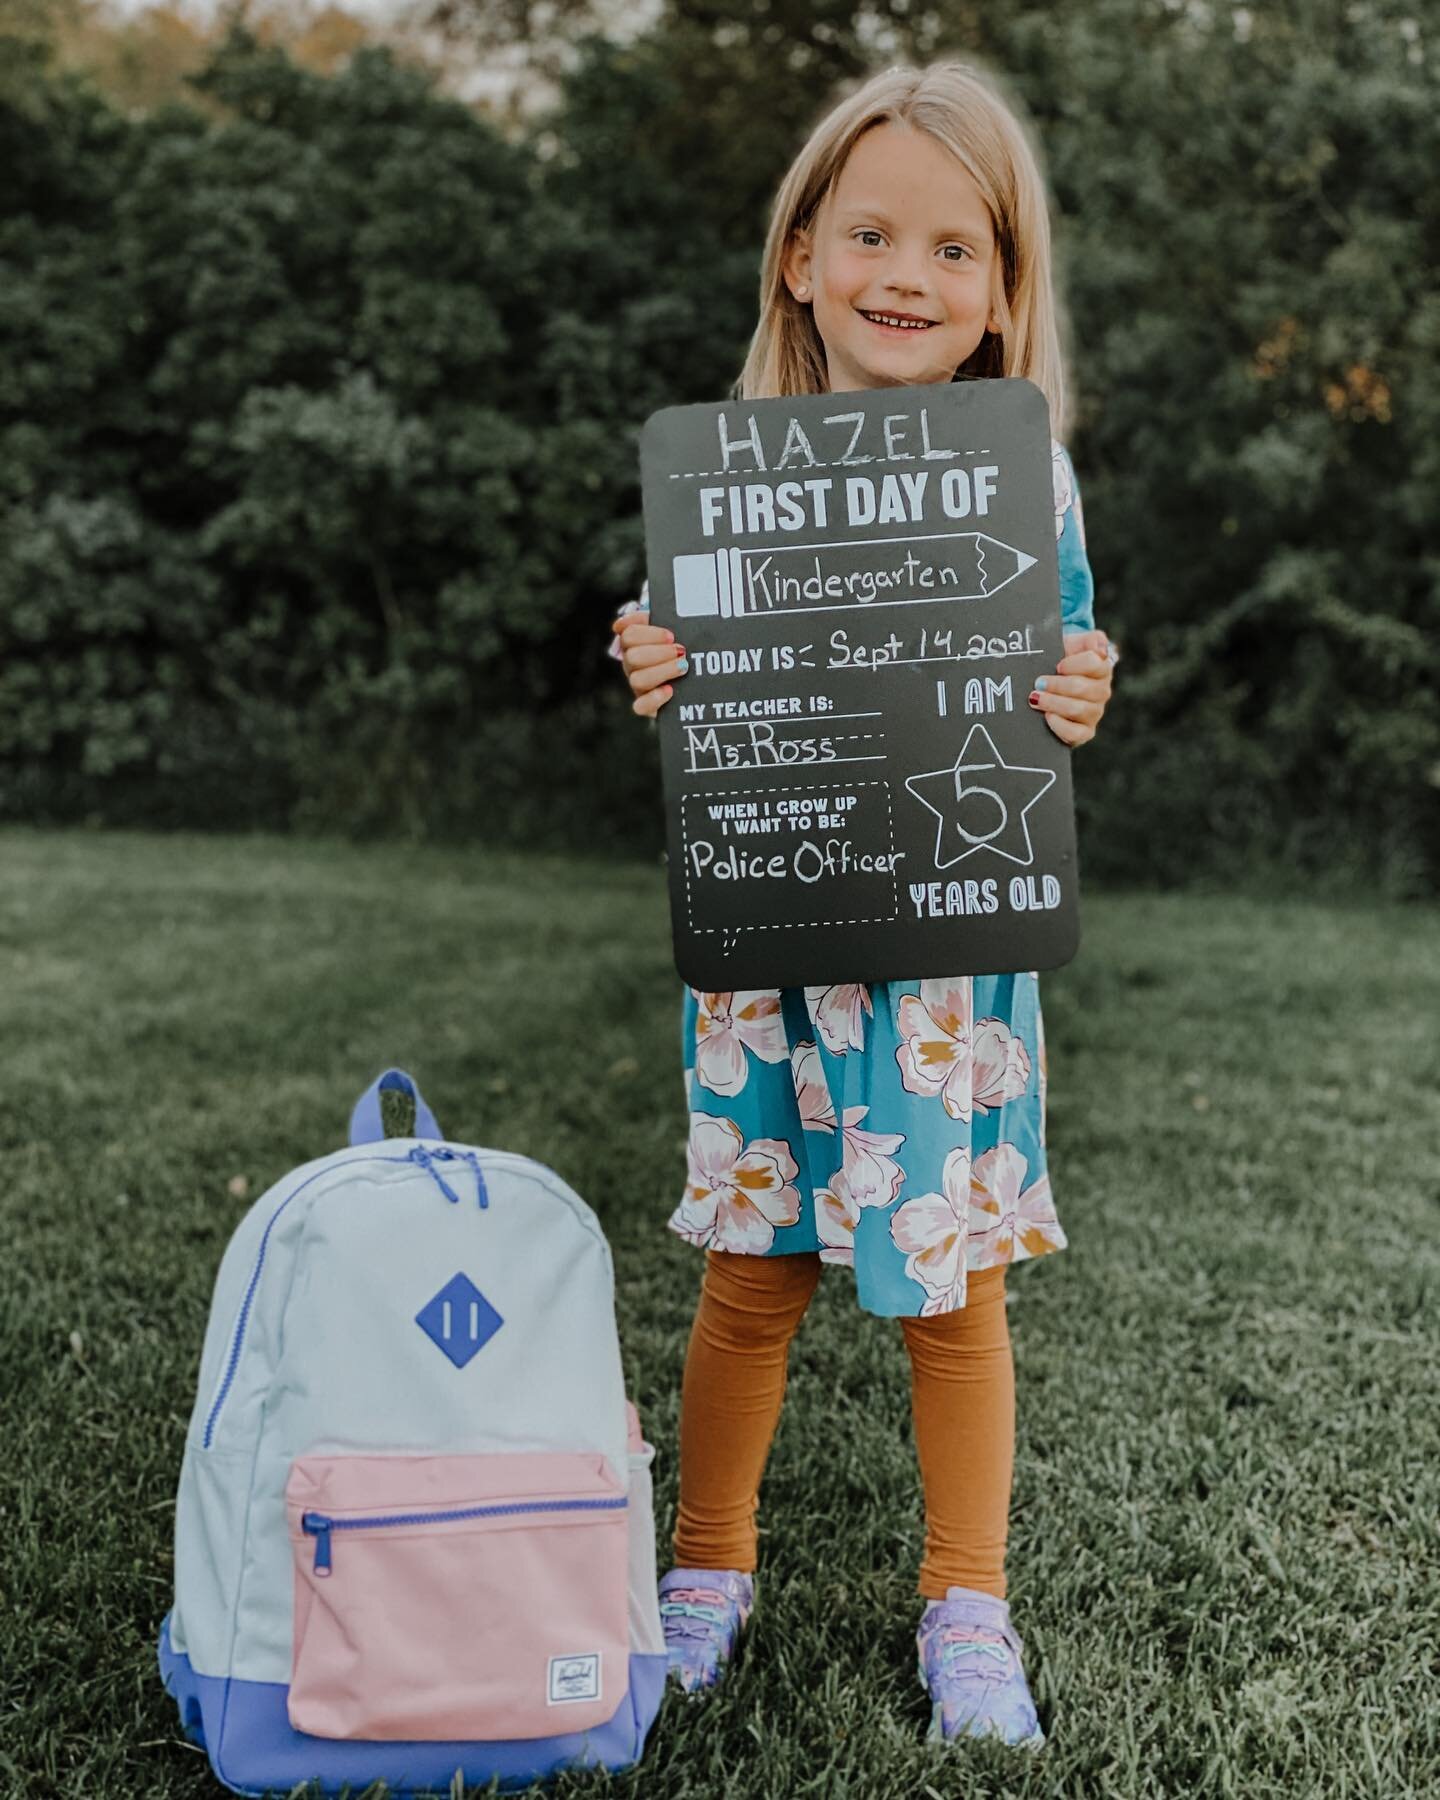 Today came way to fast.. my sweet girl is off to Kindergarten 🥰😭

Honestly feels like we just brought her home from the hospital and now she&rsquo;s off, getting ready to start a whole new journey.

Feeling allll the feels today but just soo proud 